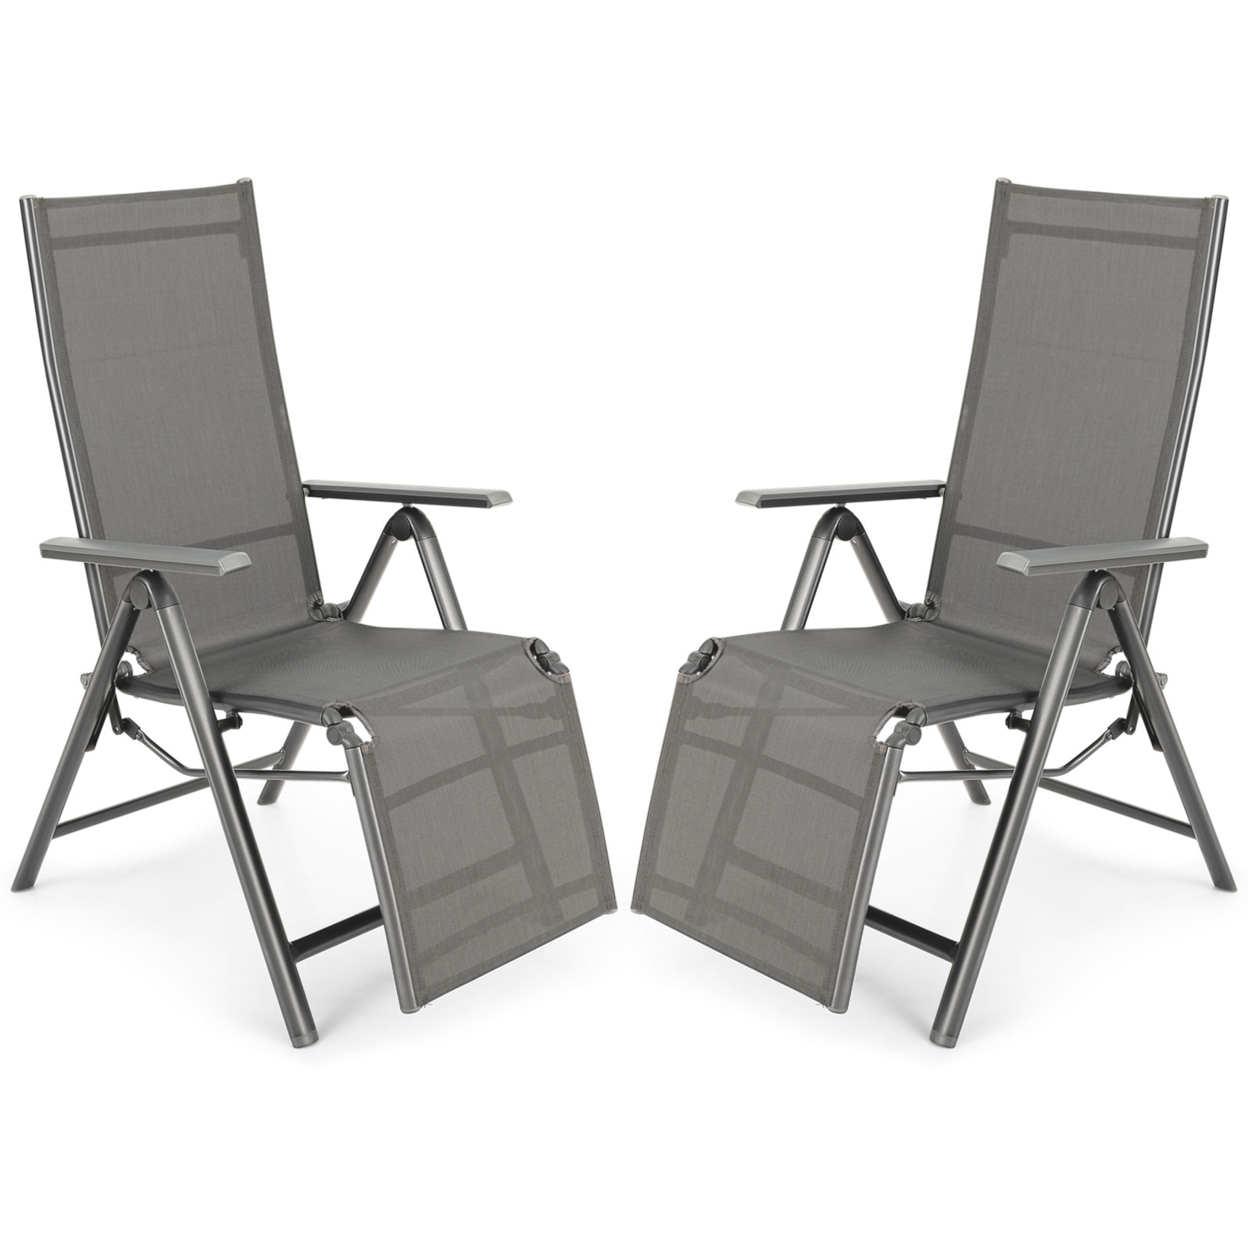 2PCS Patio Outdoor Folding Reclining Lounge Chair W/ Adjustable Backrest